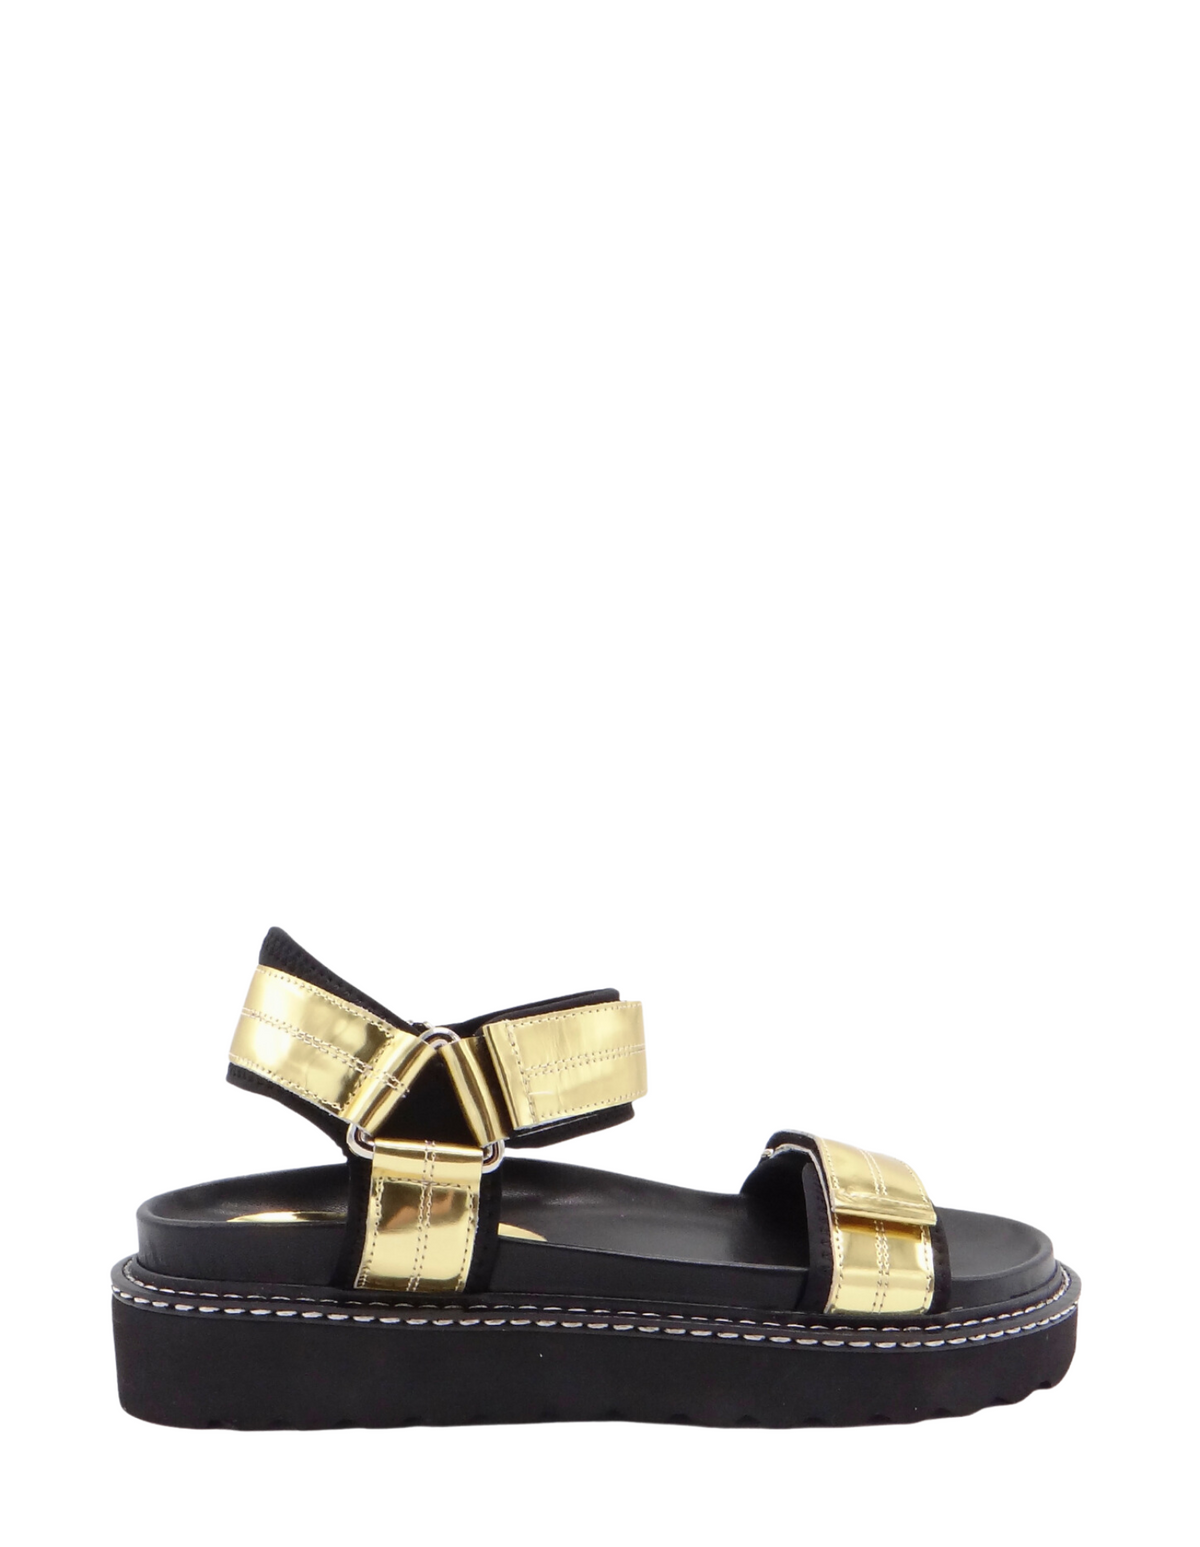 Parallel Culture Shoes and Fashion Online SANDALS CAVERLEY RONI II SANDAL